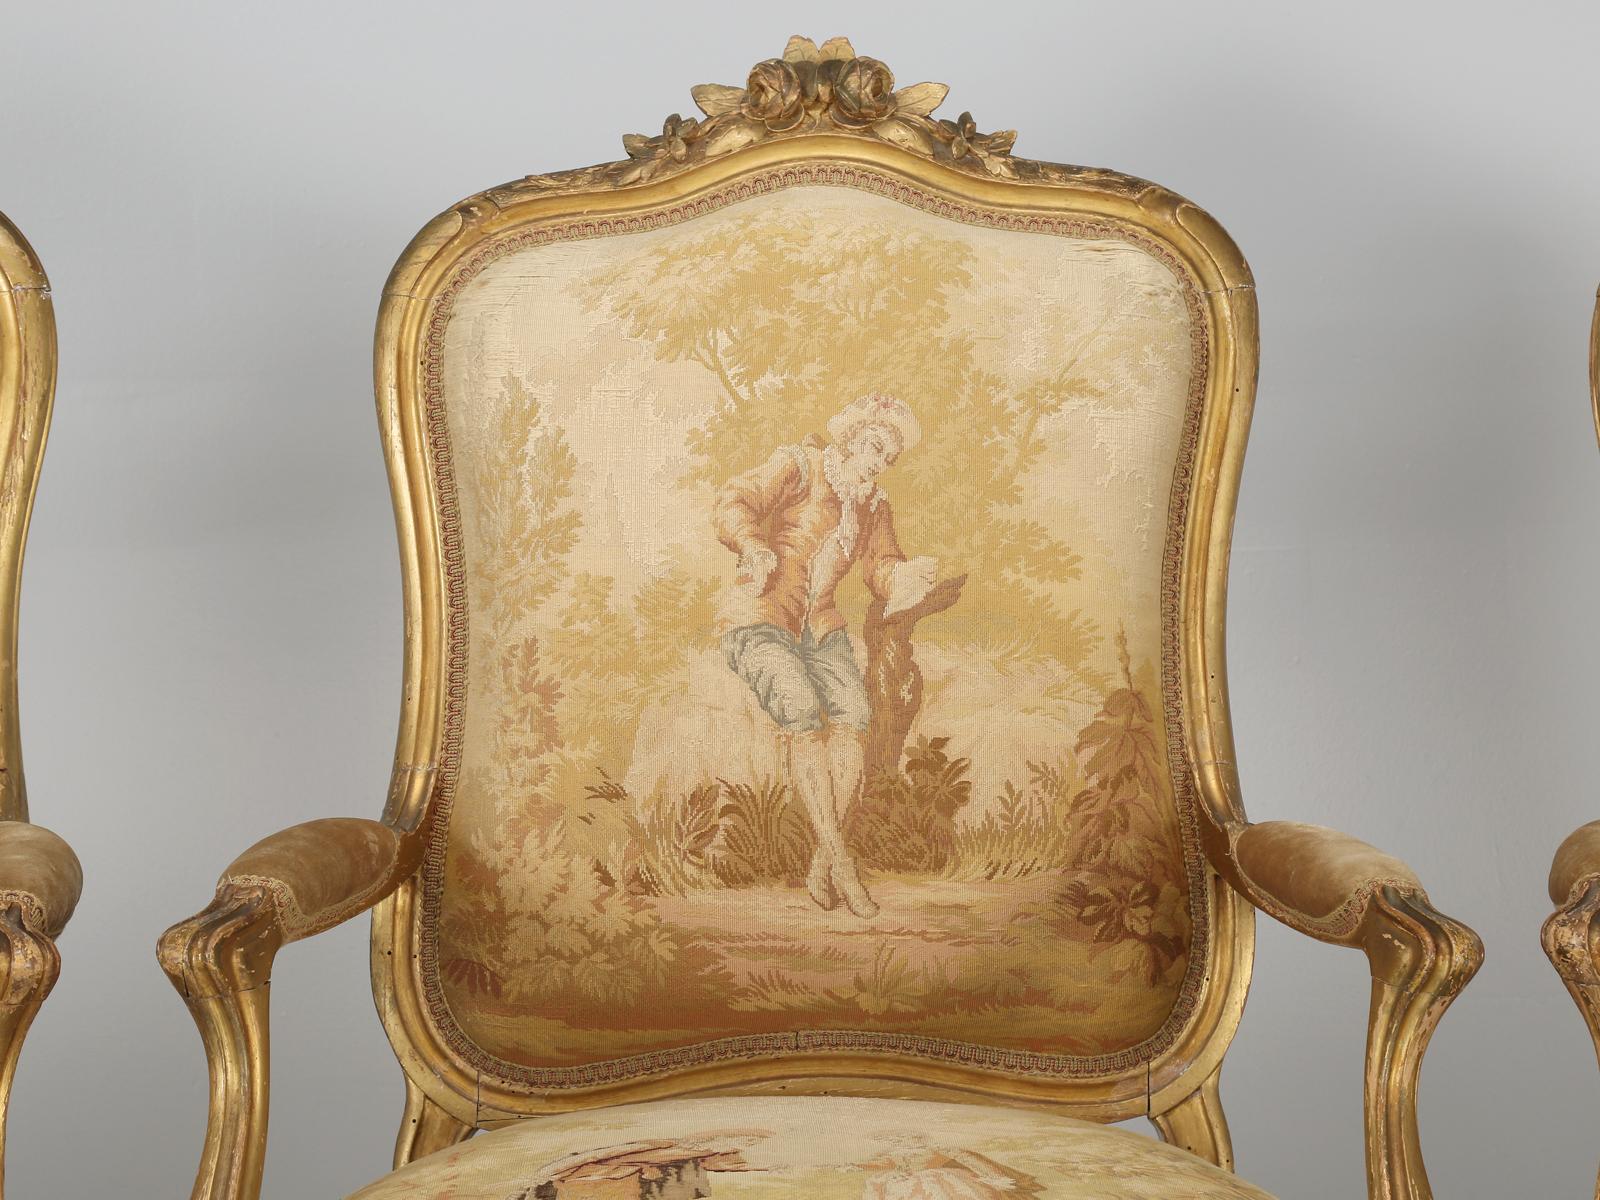 Antique French Louis XV style arm chairs in a suite of (4) matching antique French arm chairs in their original Aubusson inspired thick fabric. The gilded frames are original and have been structurally restored, but cosmetically left original. The